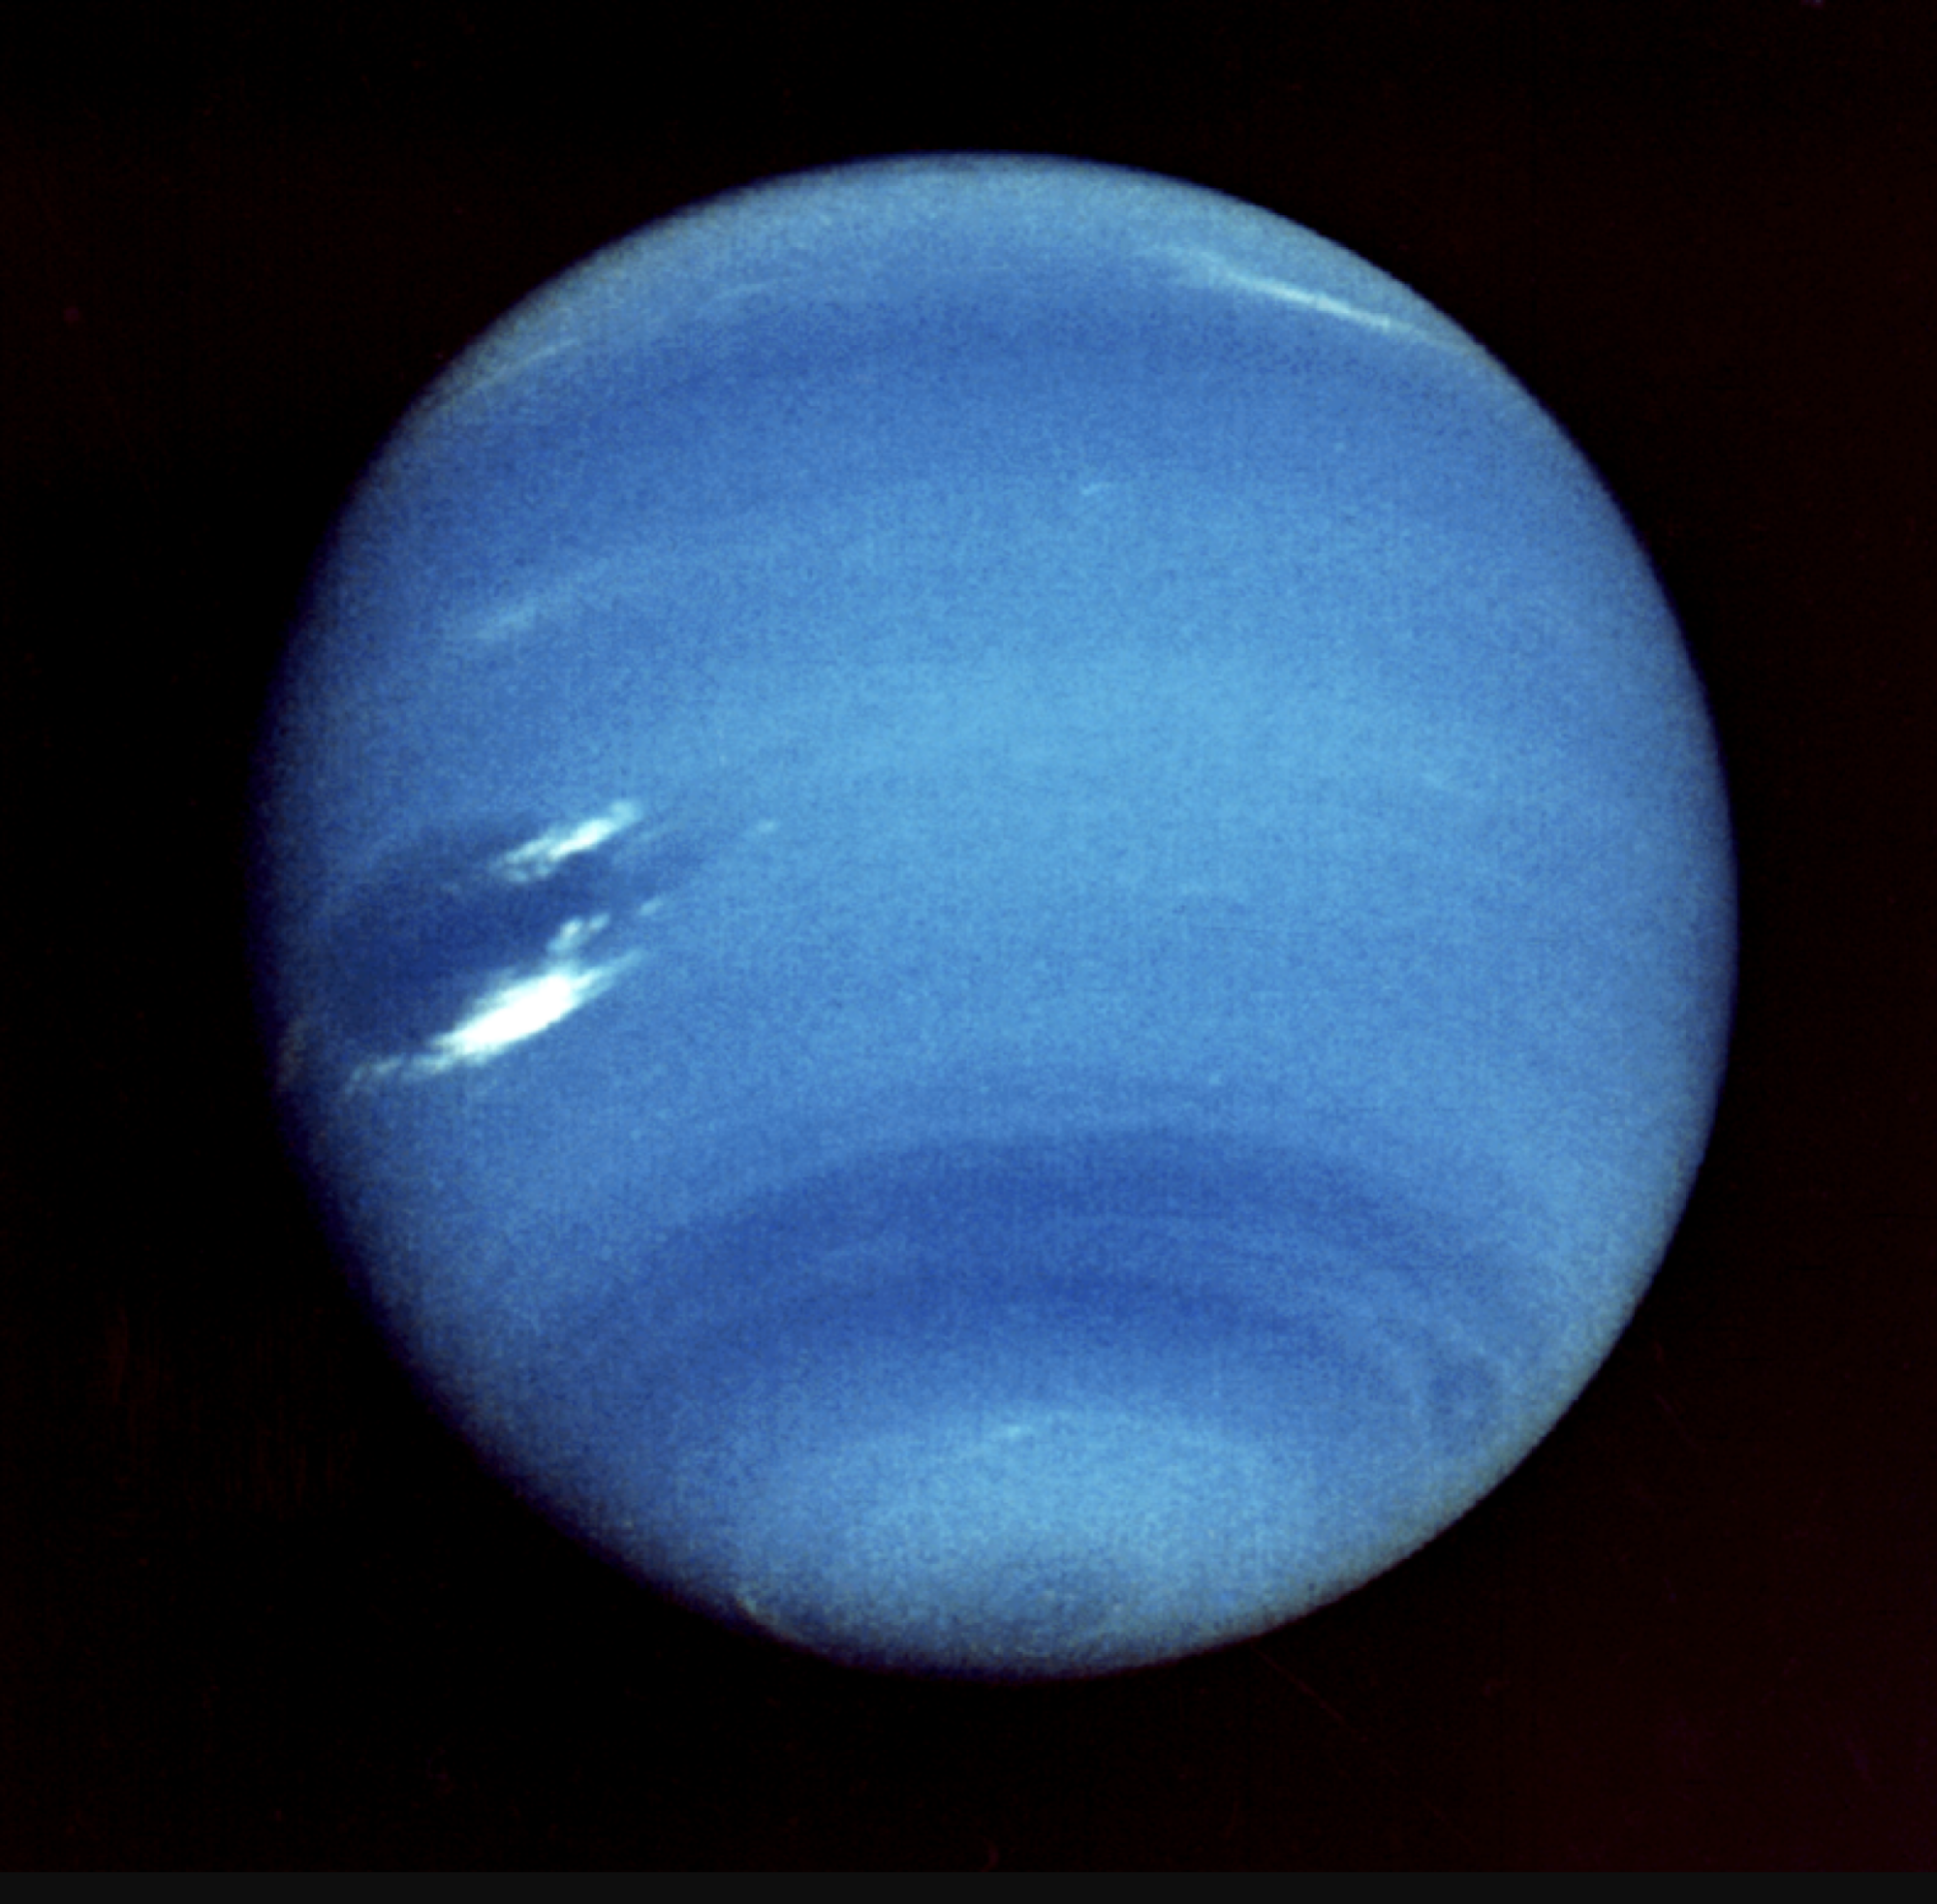 A view of Neptune from Voyager 2, taken in 1989. Strong streaks of wind are seen swirling through the atmosphere.